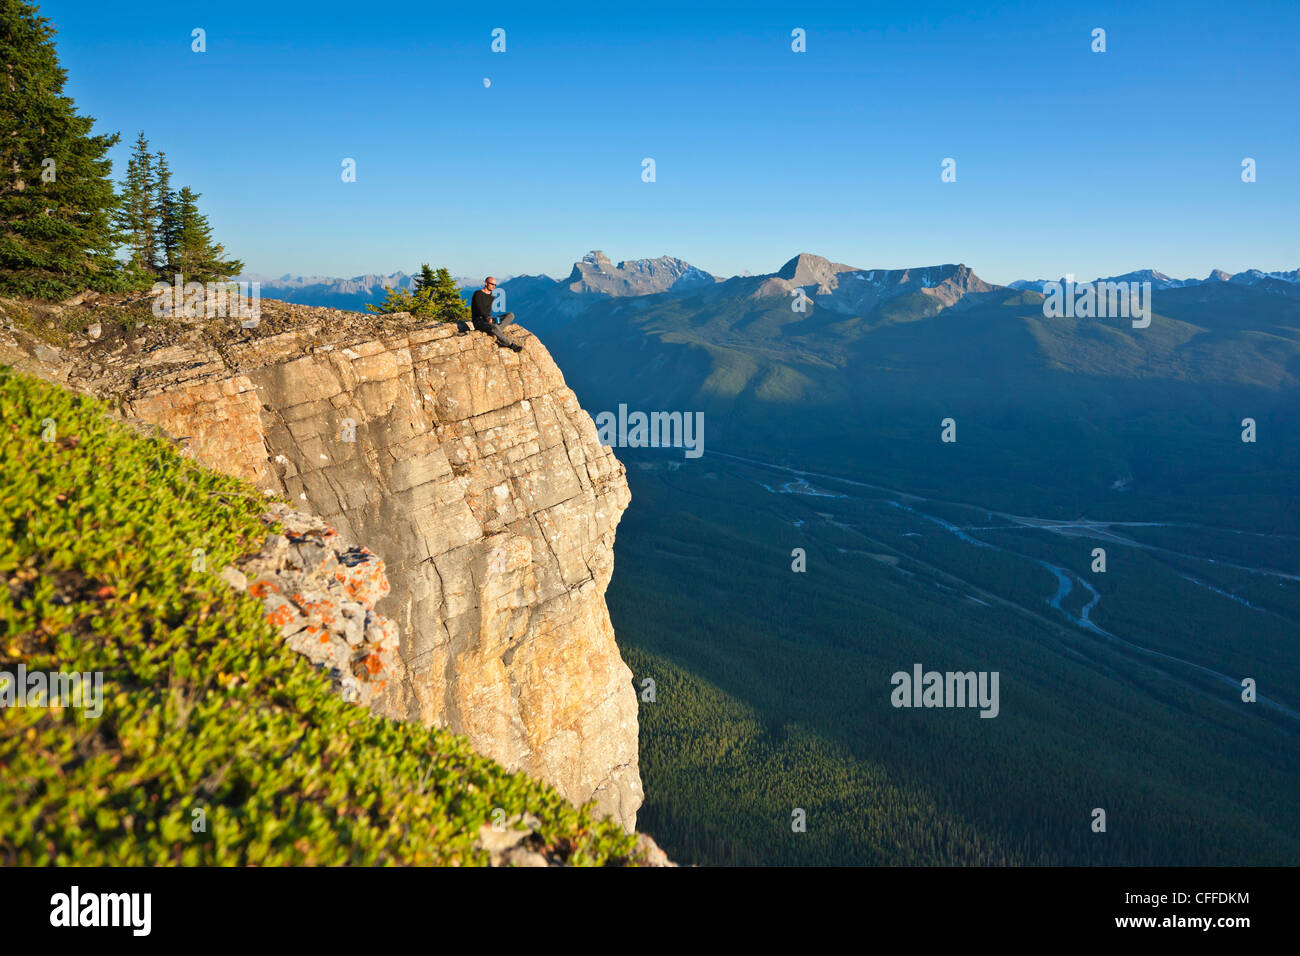 A hiker sits on a cliff edge, Banff National Park, Alberta, Canada. Stock Photo